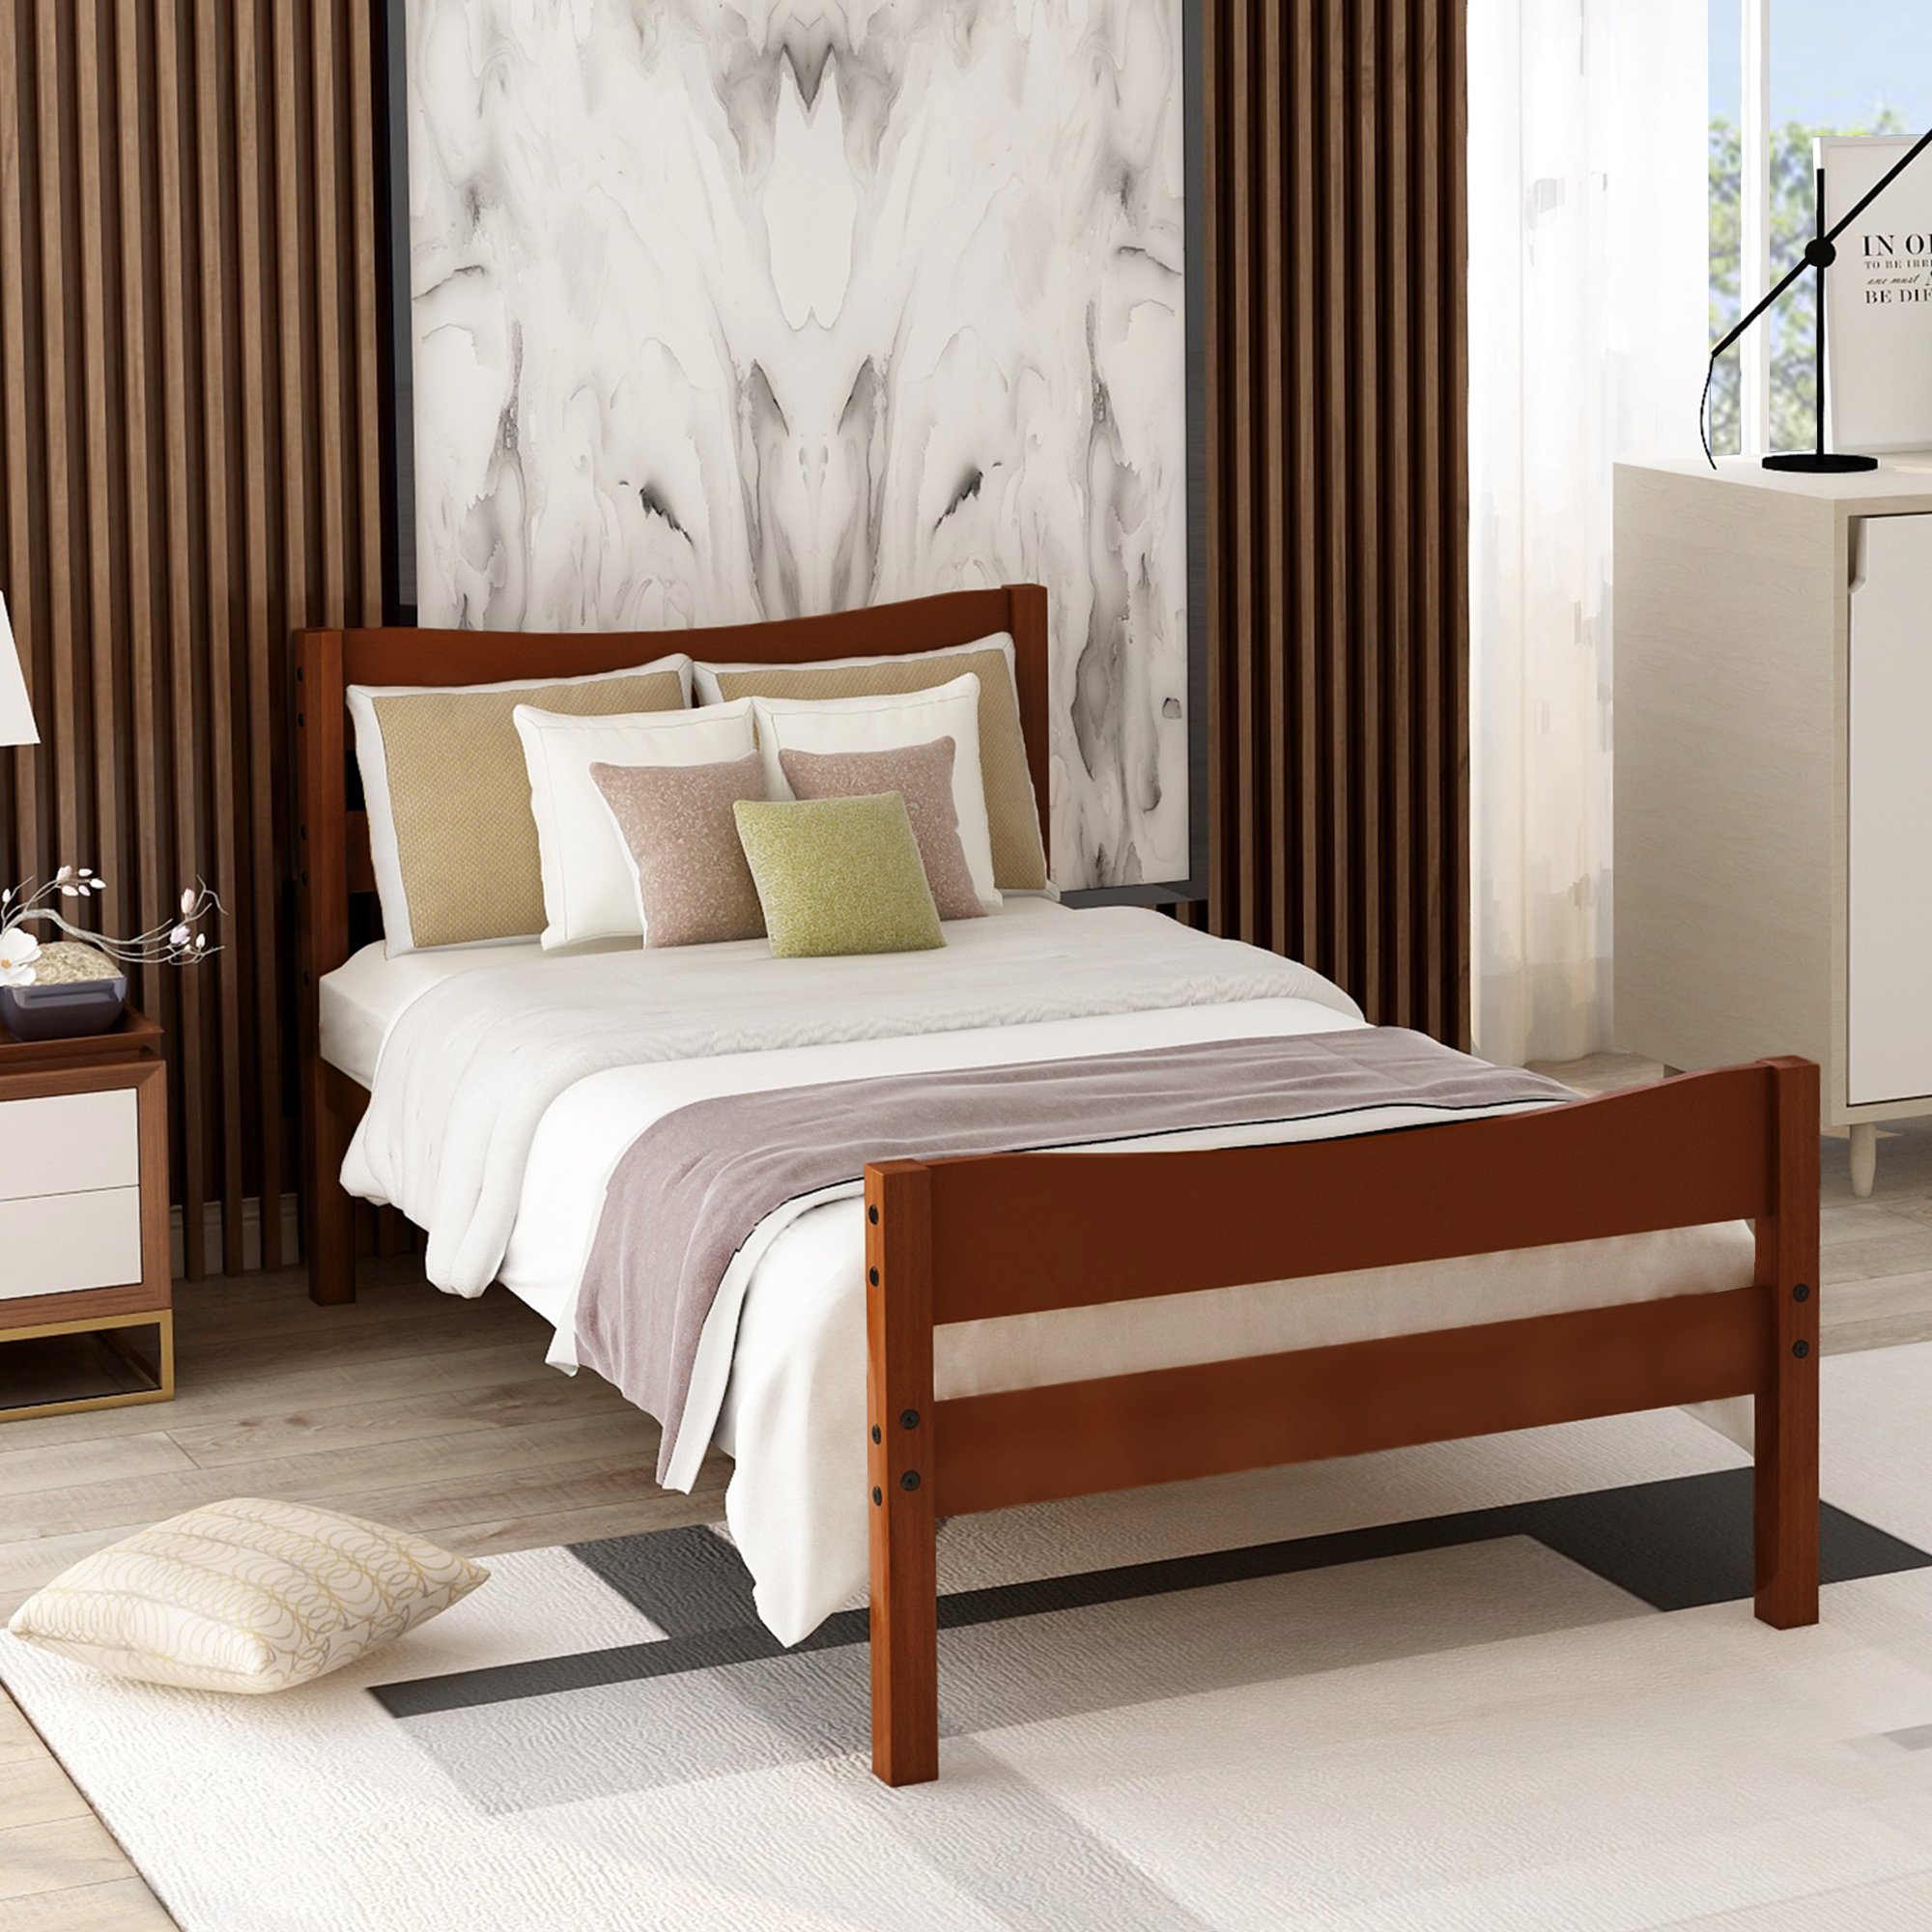 【Not allowed to sell to Walmart】Twin Size  Wood Platform Bed with Headboard and Wooden Slat Support (Walnut)-Boyel Living